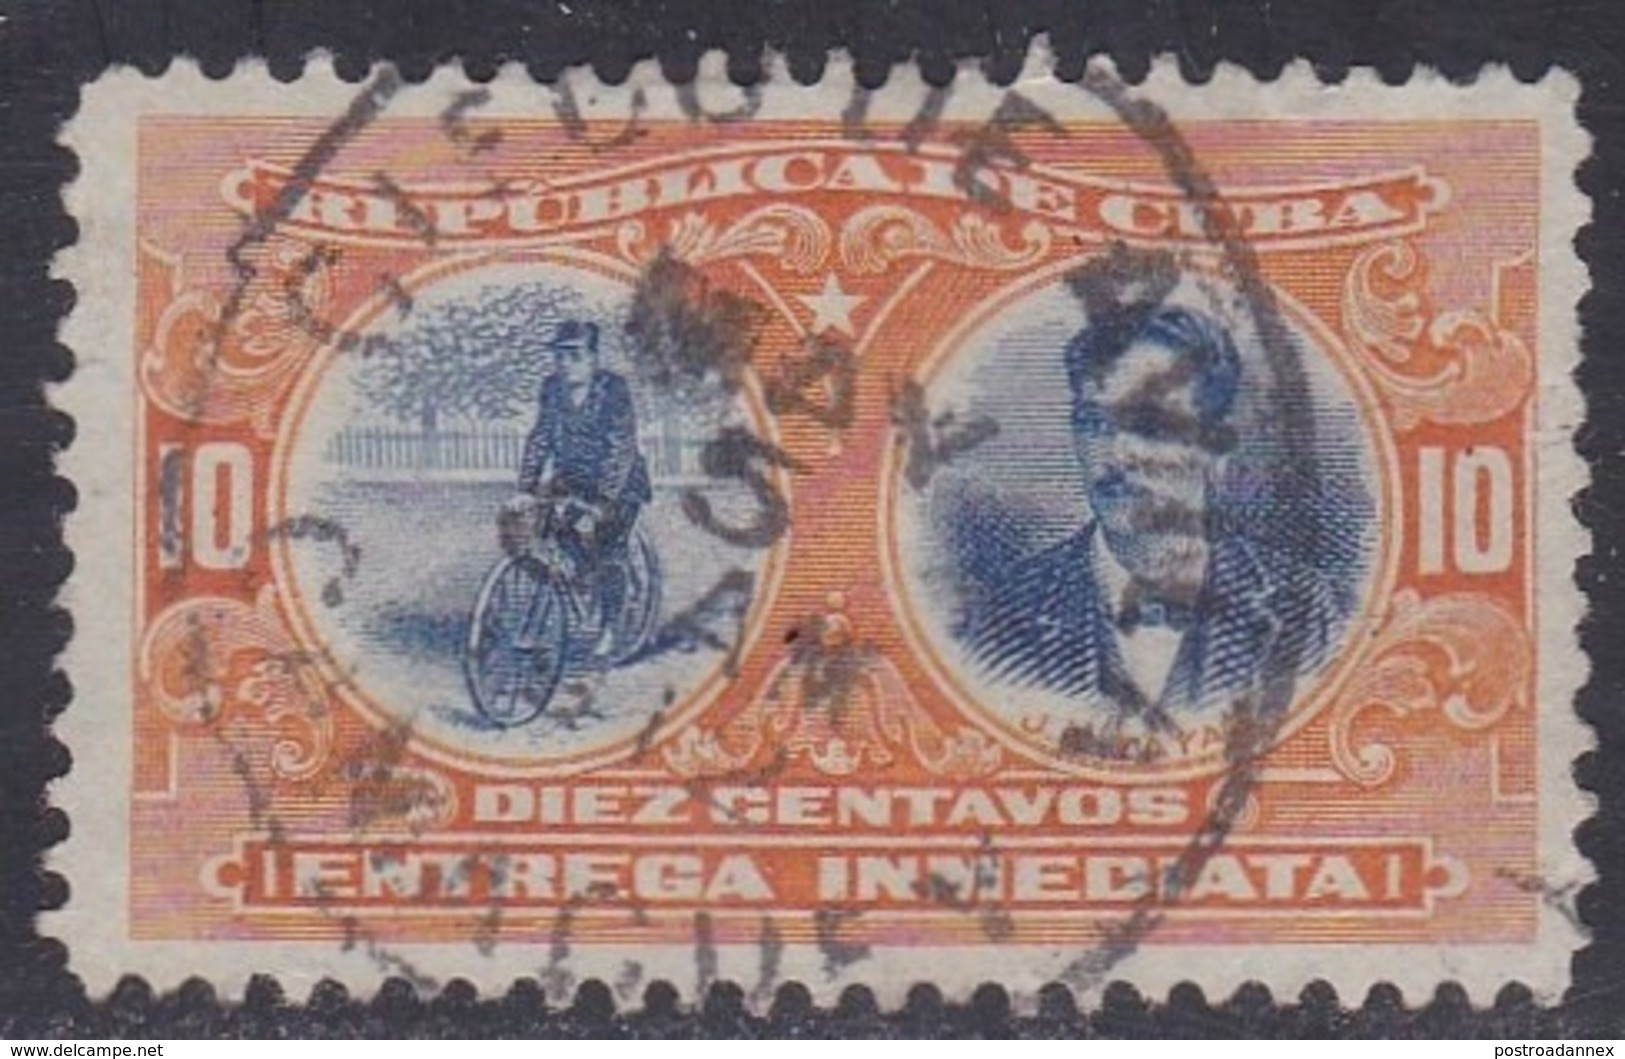 Cuba, Scott #E4, Used, Zayas, Issued 1910 - Express Delivery Stamps